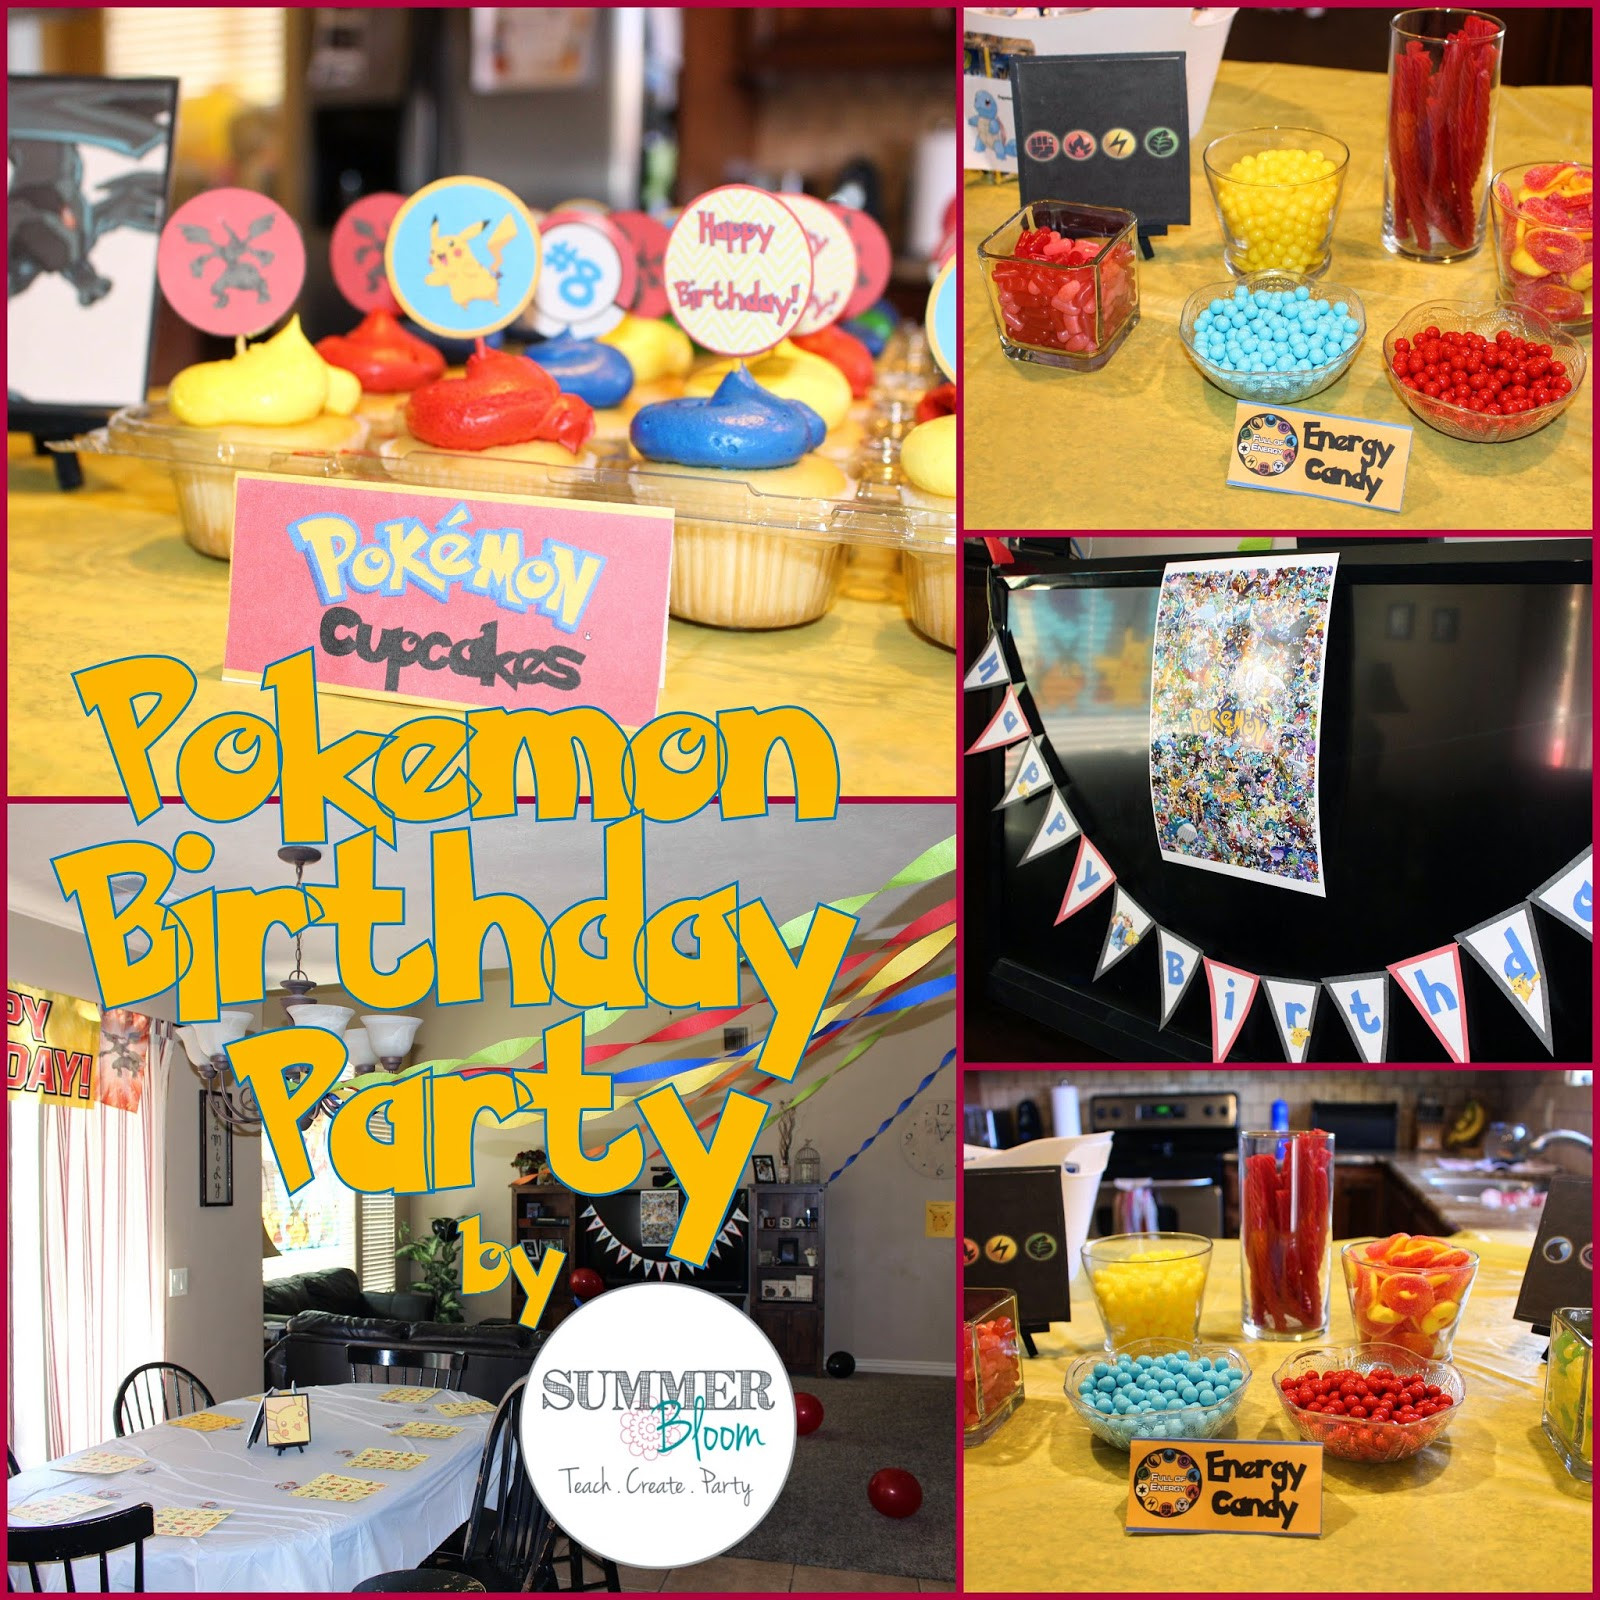 Best ideas about Pokemon Birthday Party
. Save or Pin Summer Bloom Teach Create Party Pokemon Birthday Party Now.